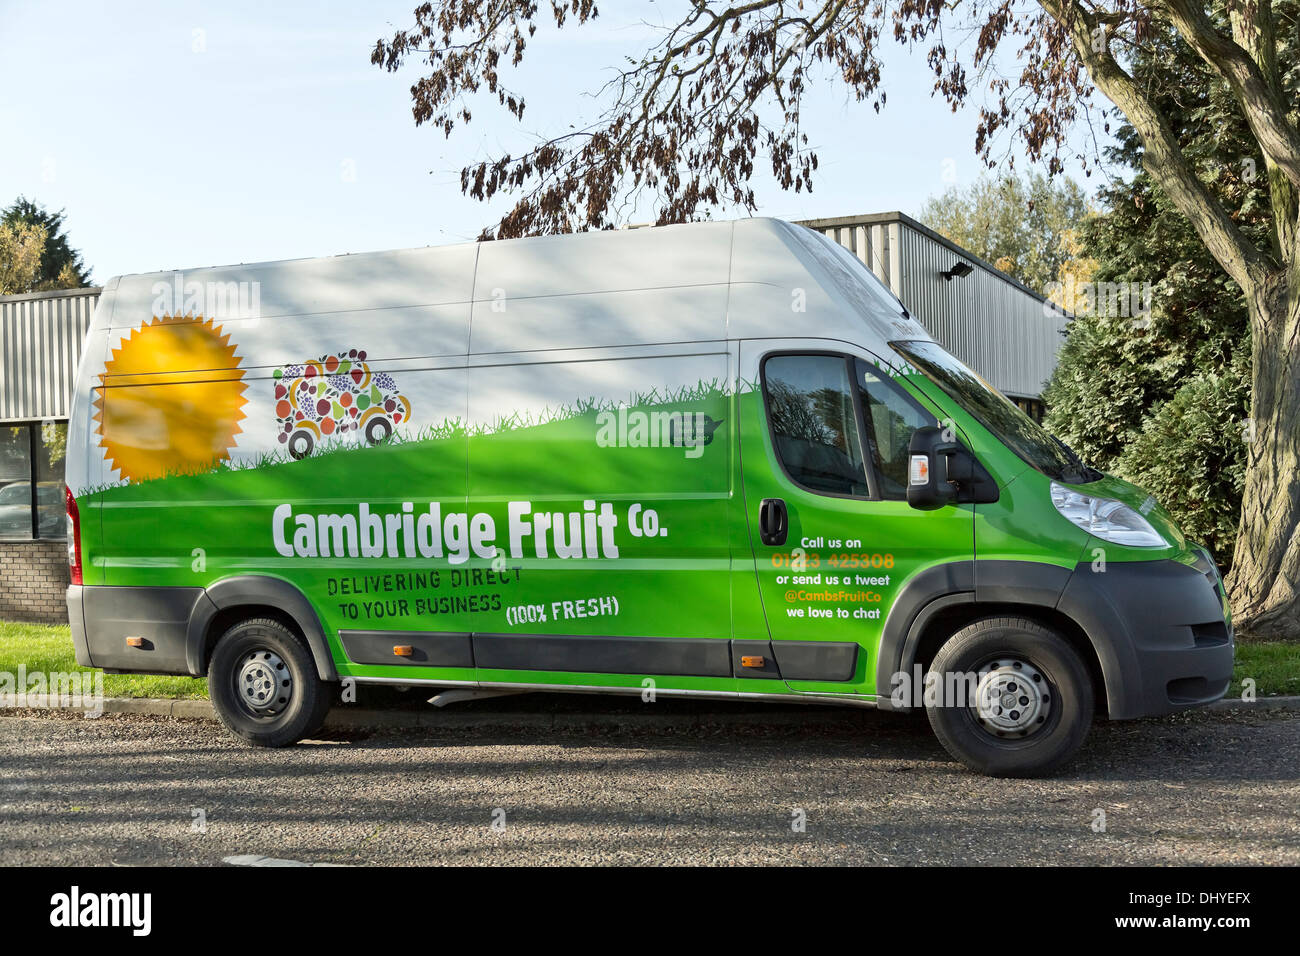 Cambridge Fruit Co. van parked by the side of a road in Cambridge, England Stock Photo